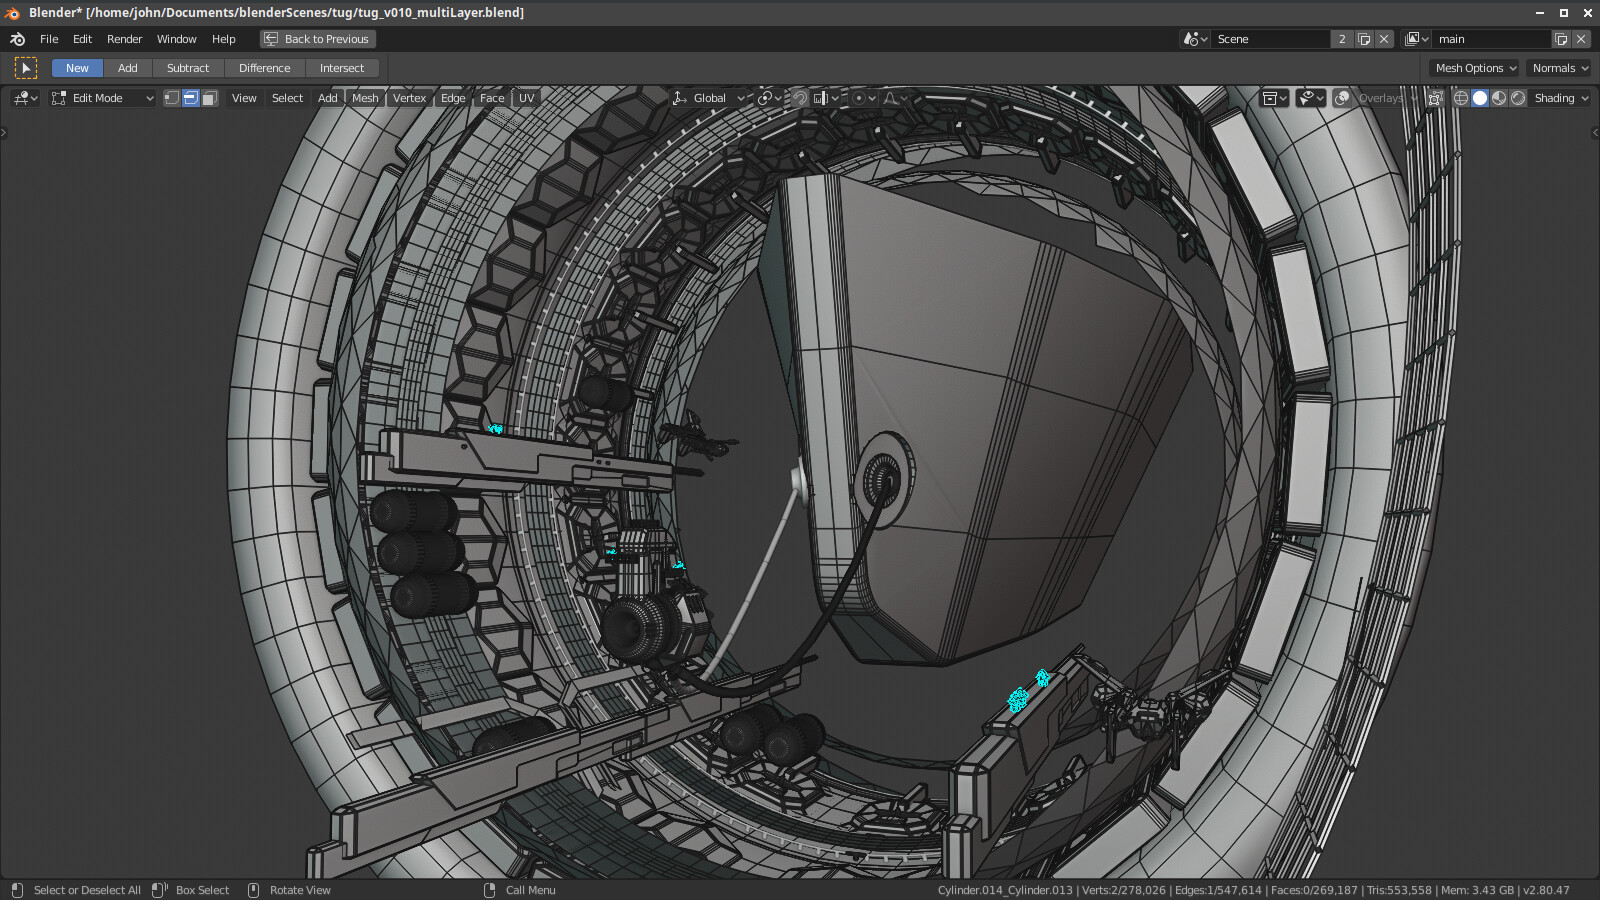 wider view with wireframe